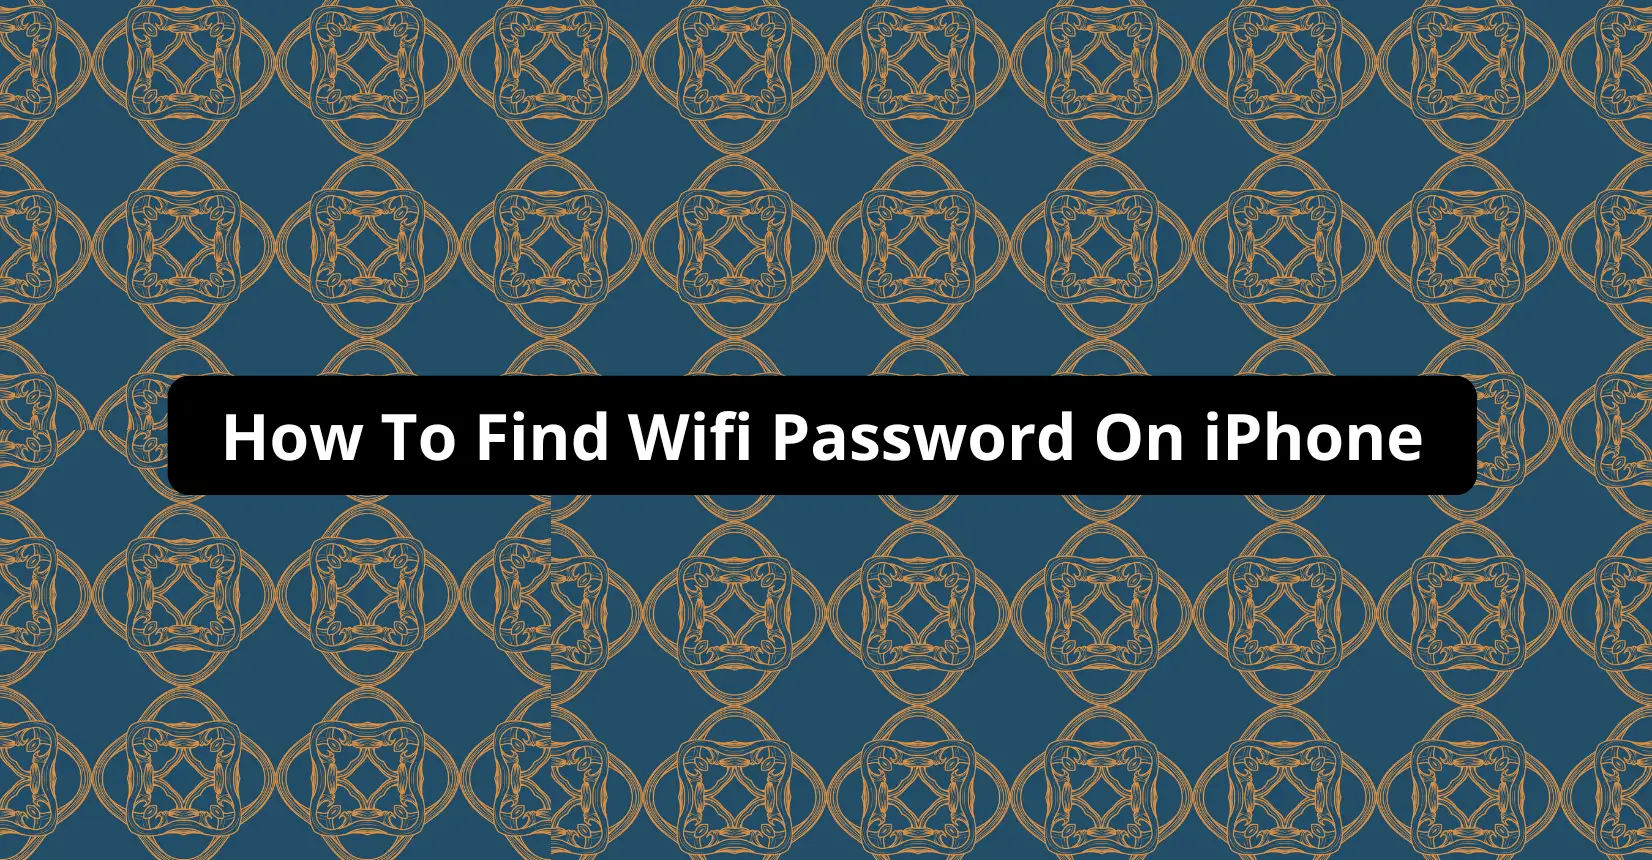 How To Find Wifi Password On iPhone